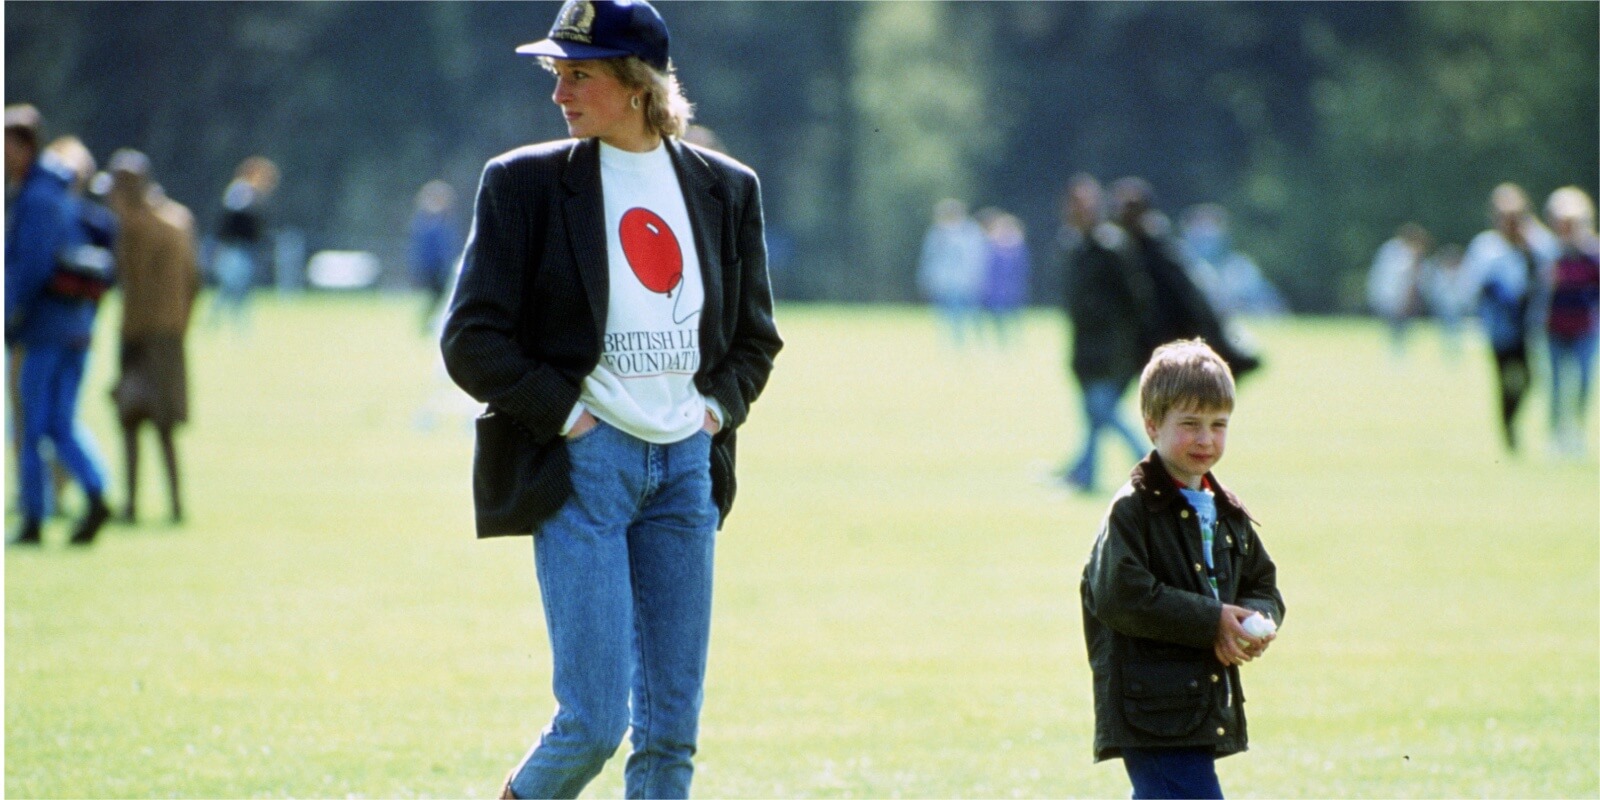 Princess Diana and Prince William in 1988 at Guards Polo Club.